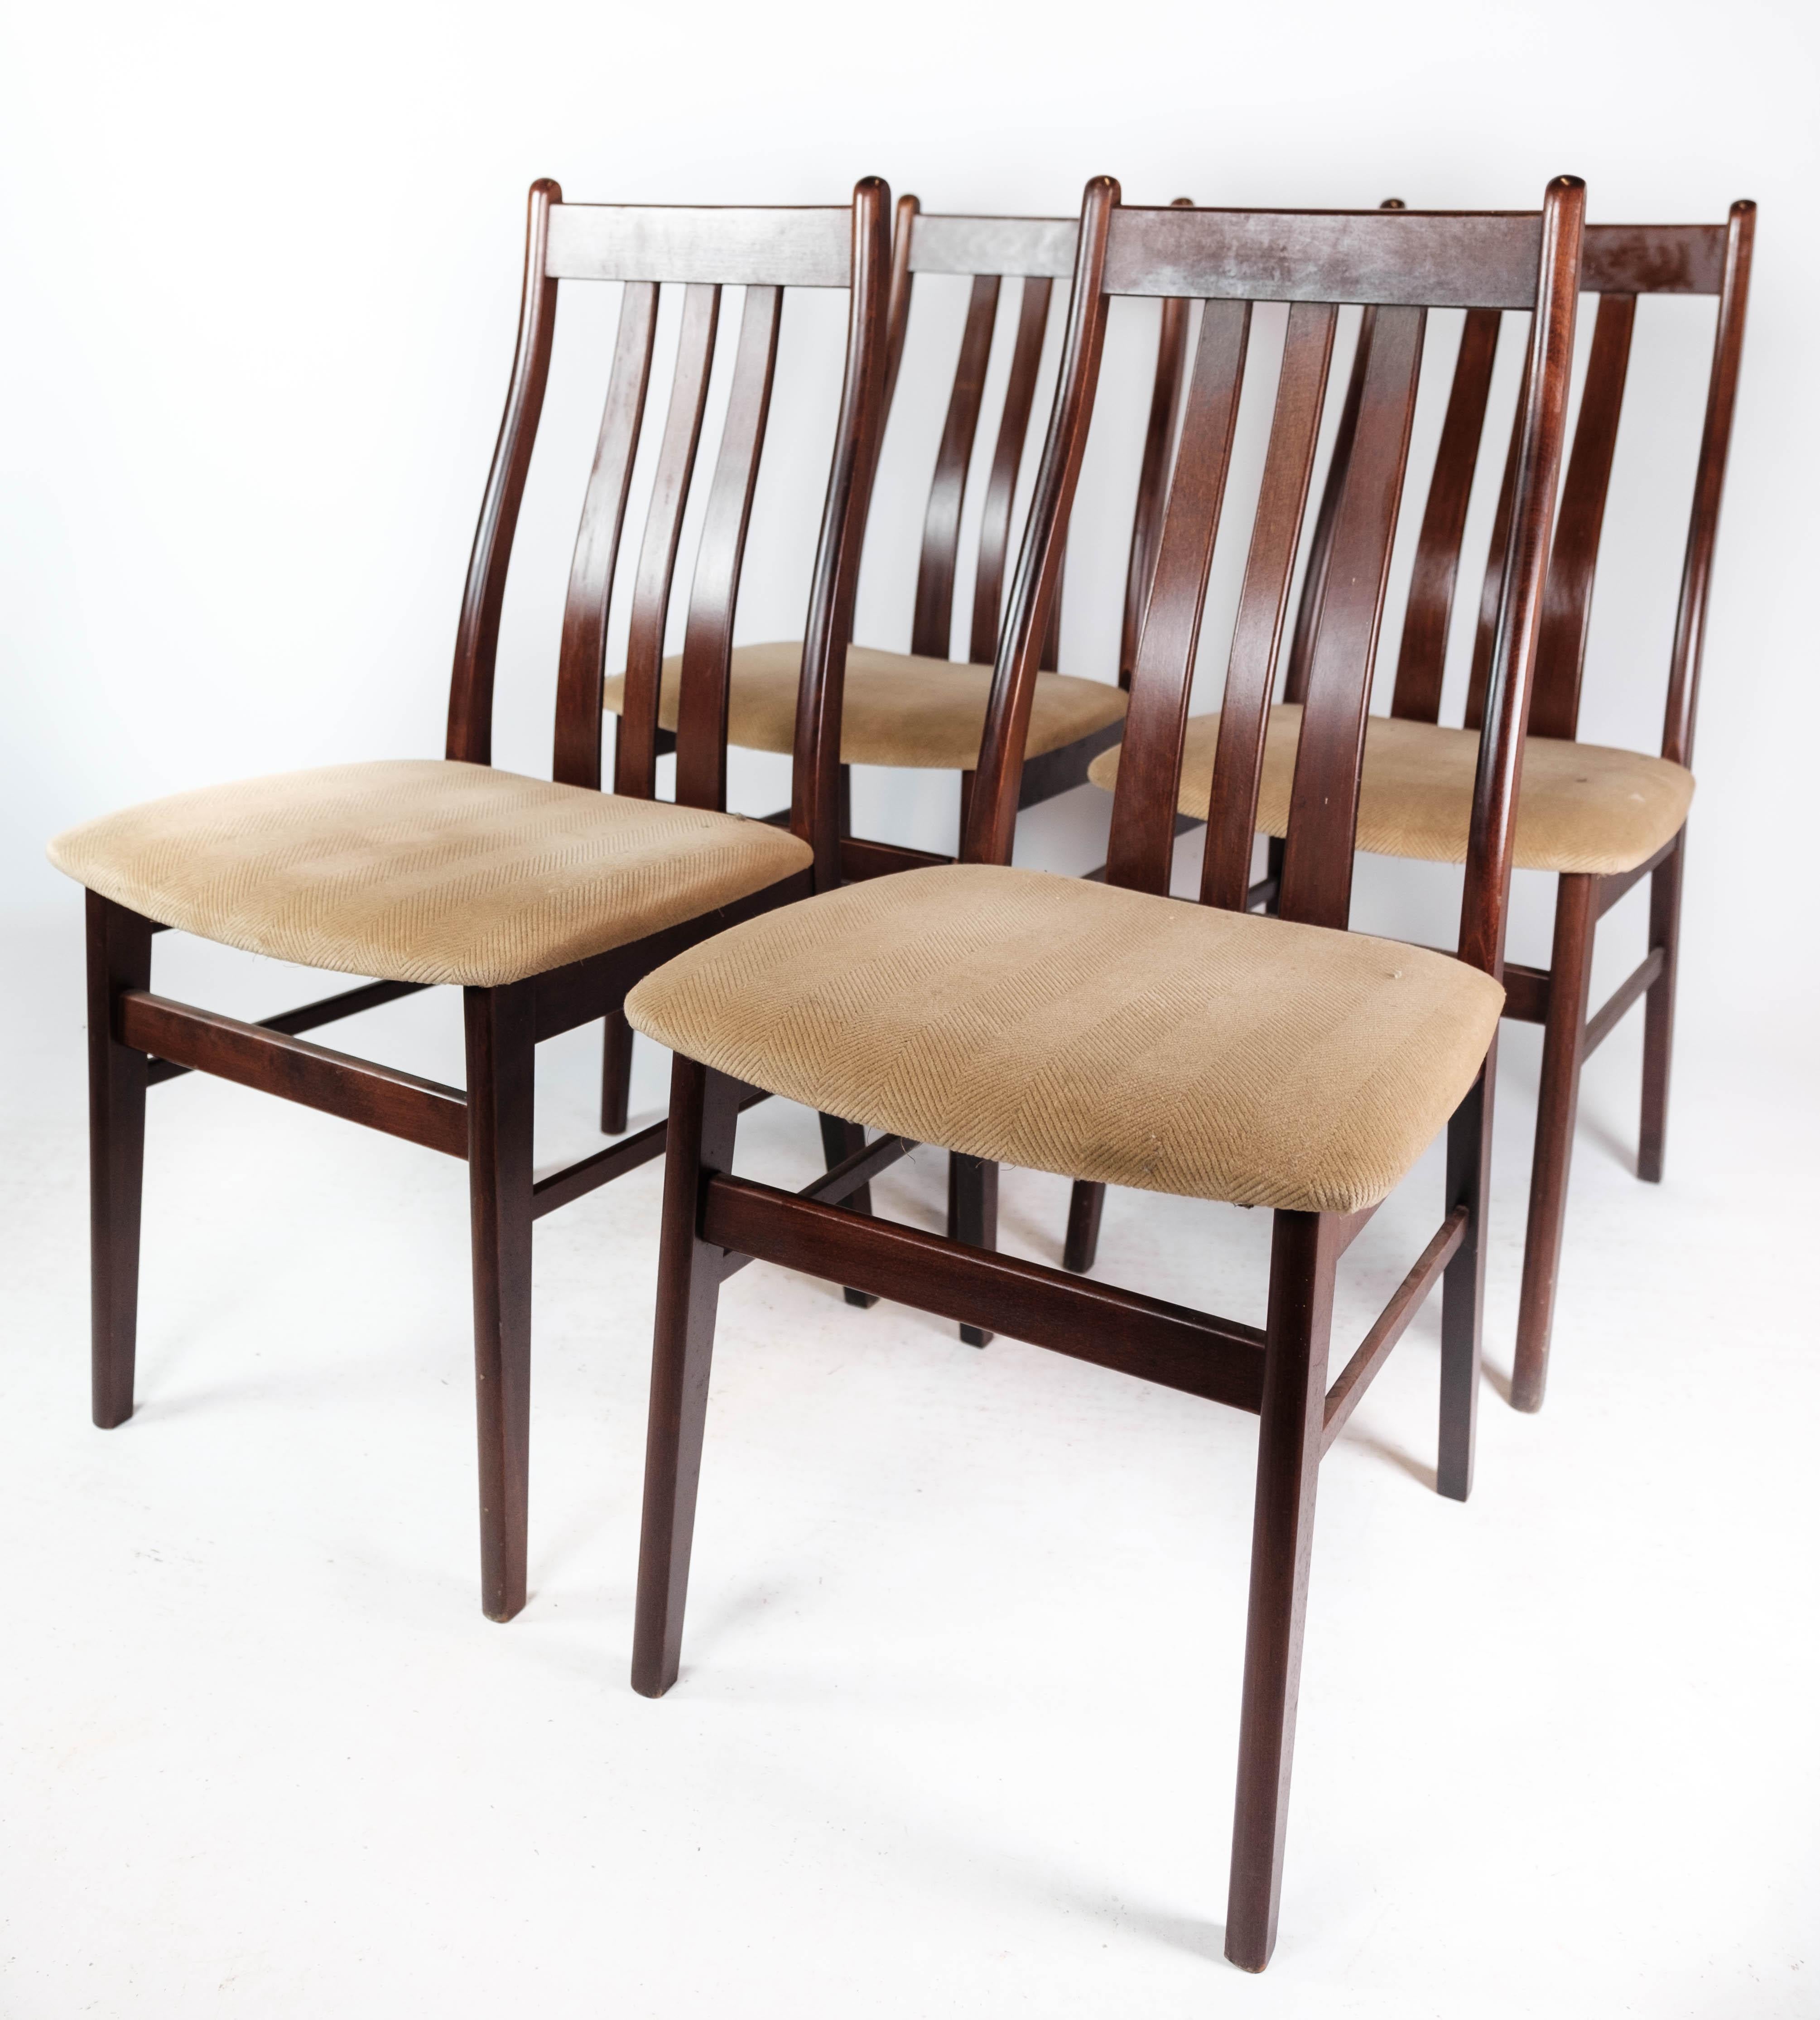 Set of Four Dining Room Chairs Made In Mahogany By Farstrup From 1960s In Good Condition For Sale In Lejre, DK